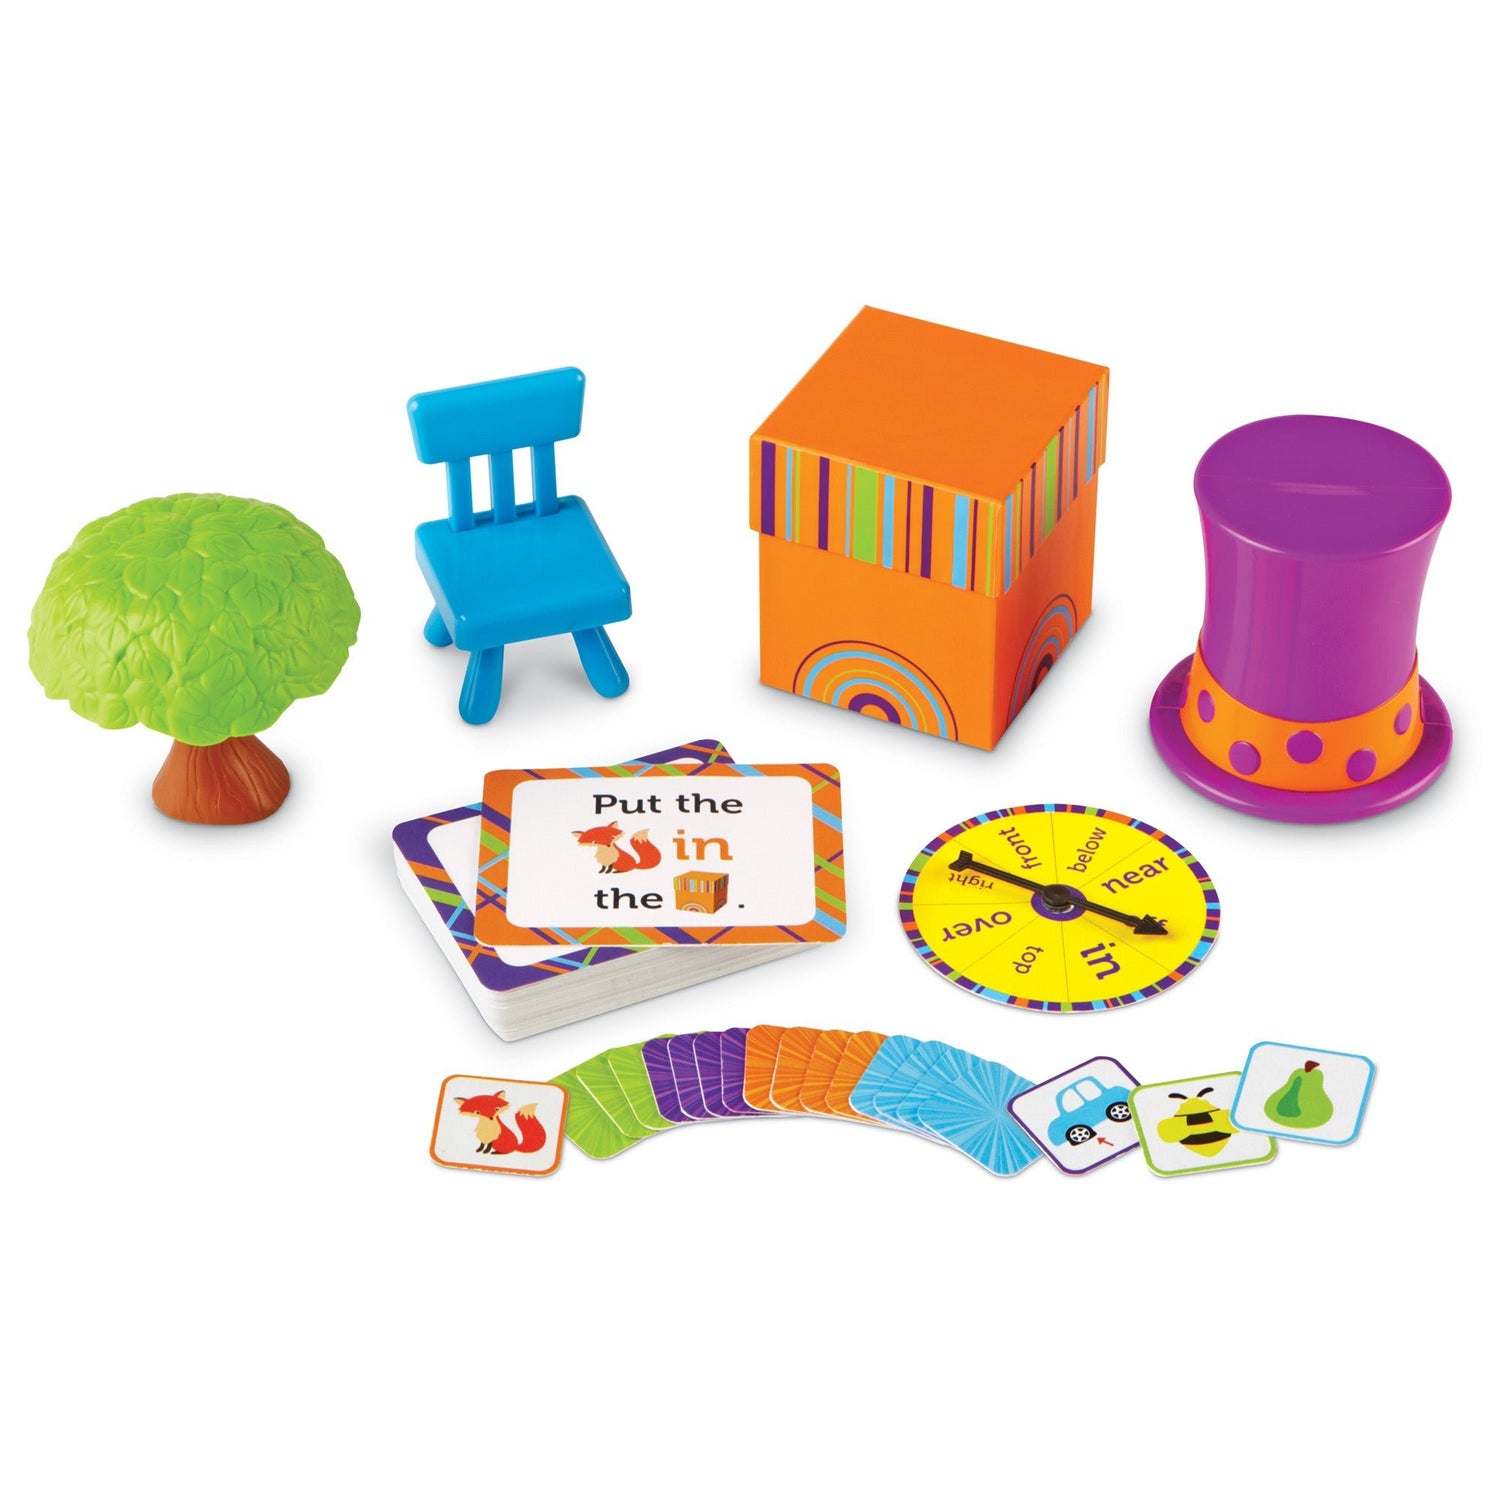 FOX IN A BOX - POSITIONAL WORD ACTIVITY SET by LEARNING RESOURCES - The Playful Collective